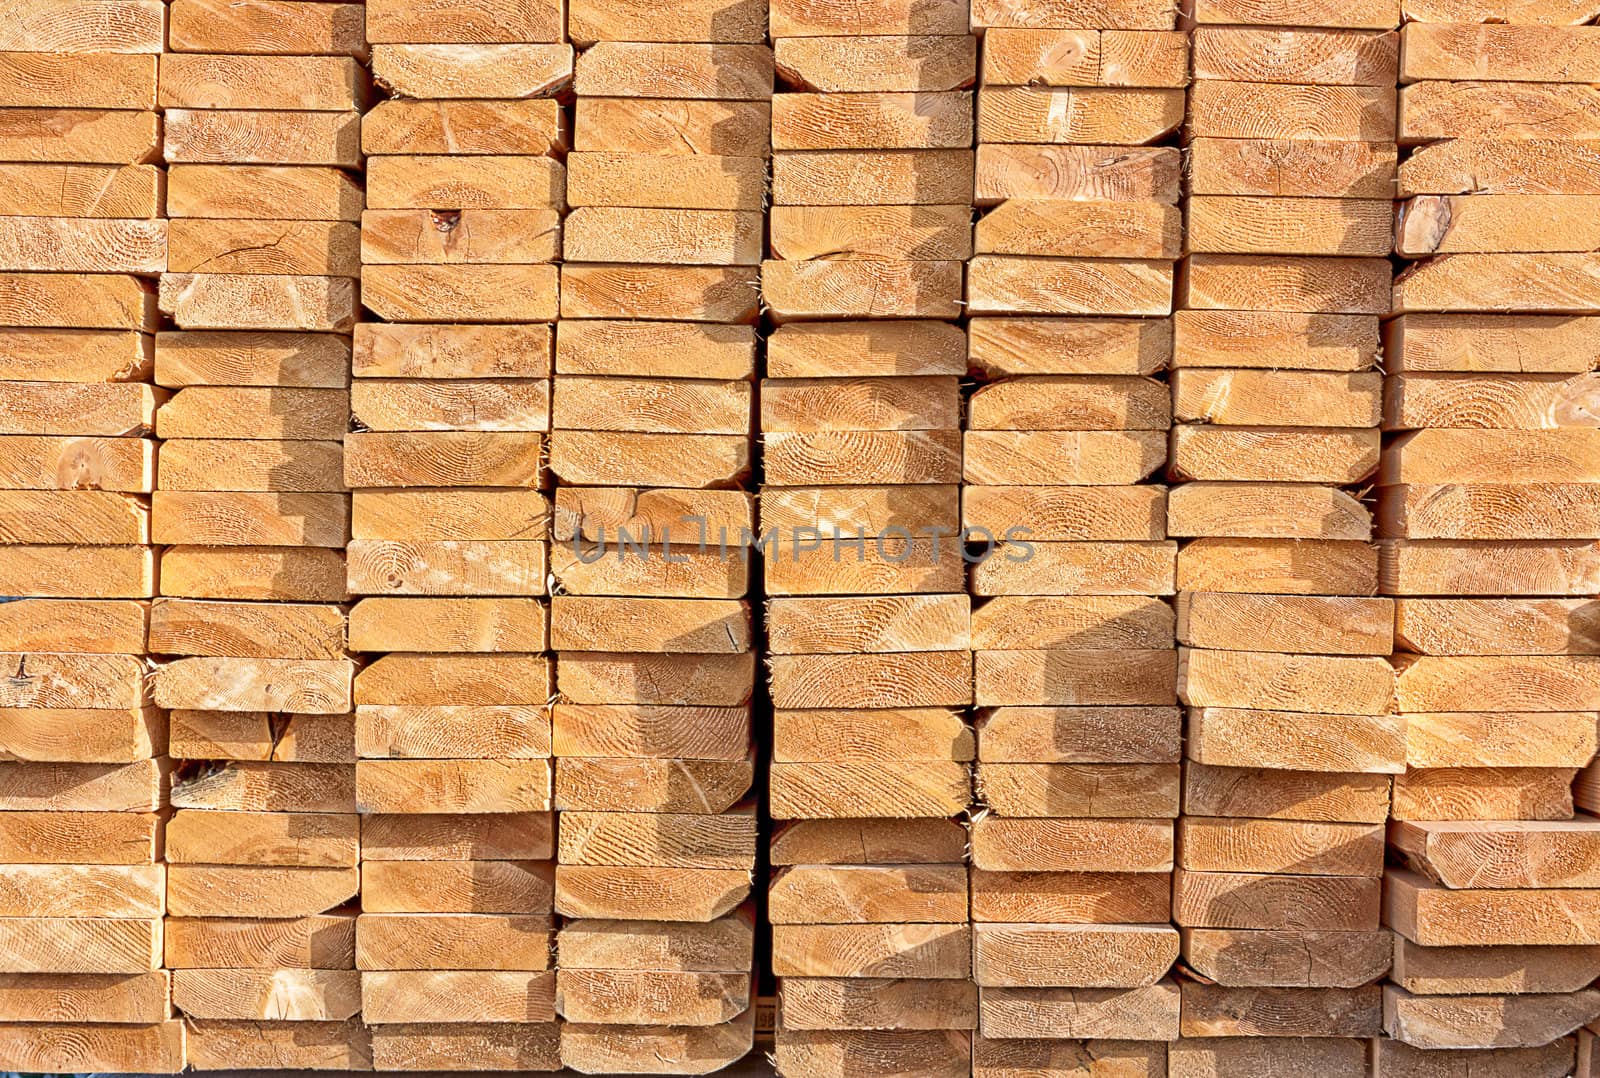 Lumber is Stacked and Ready to be Used at Construction Site